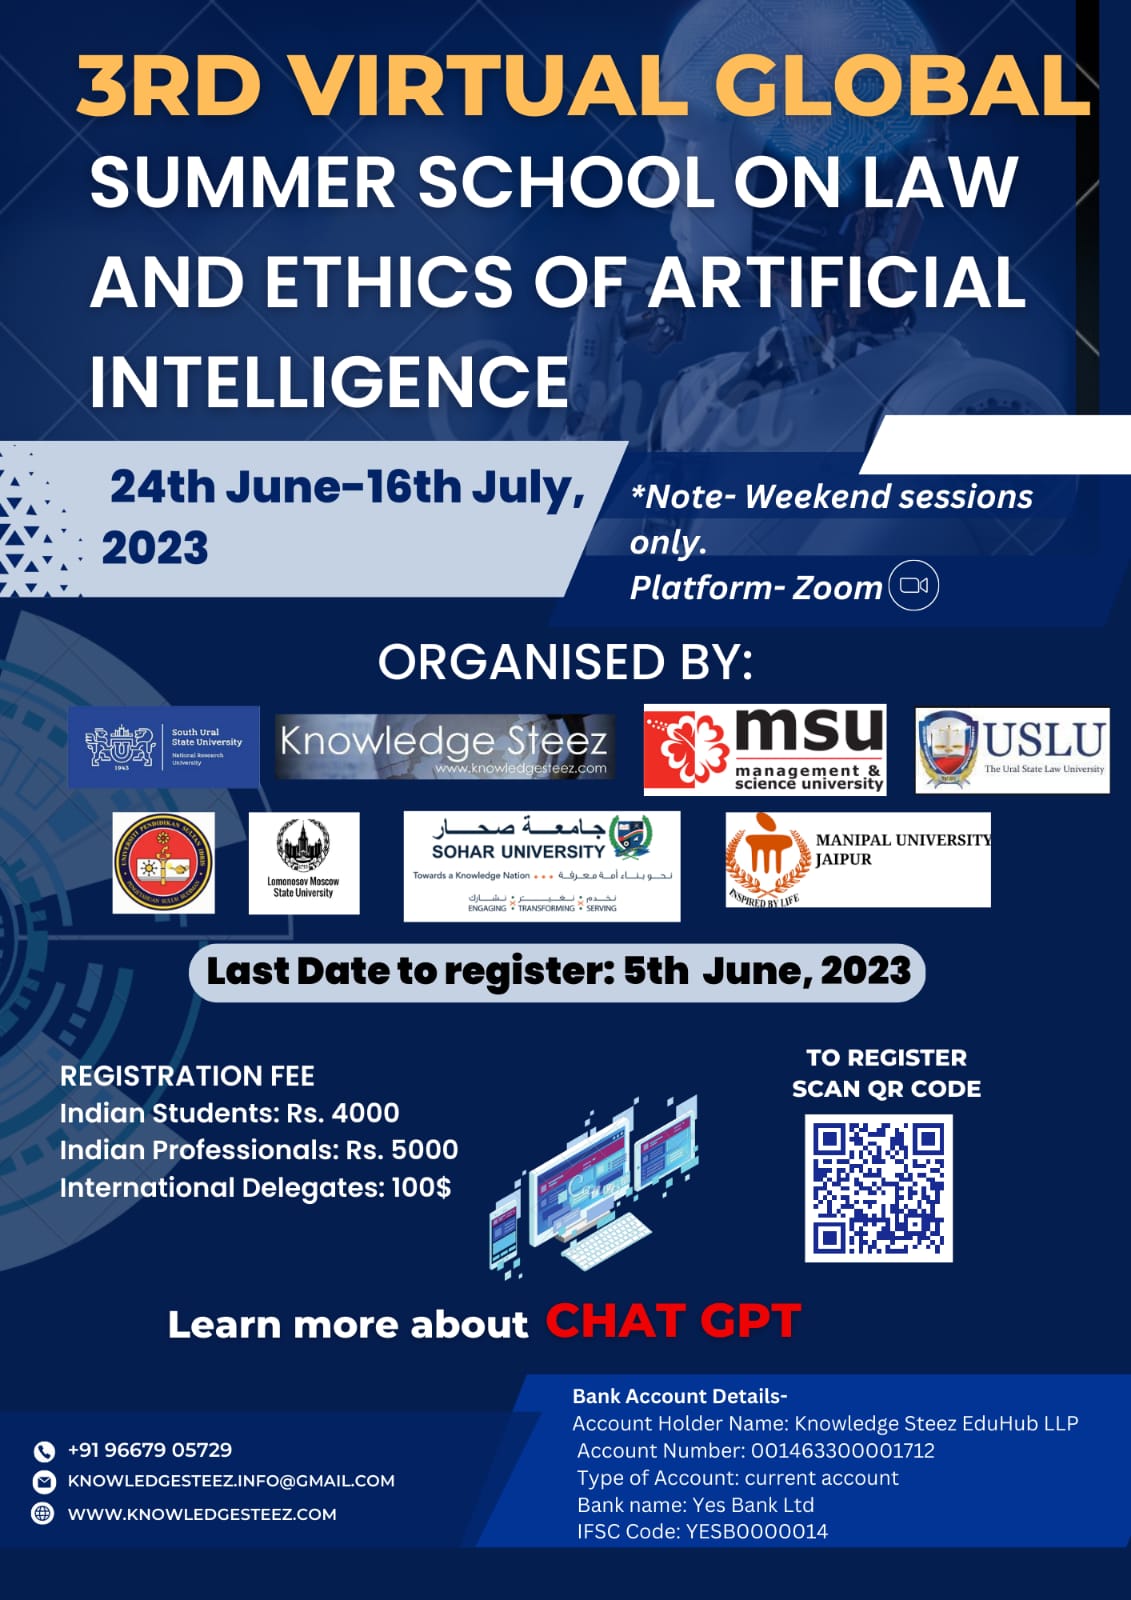 3rd VIRTUAL GLOBAL SUMMER SCHOOL ON LAW AND ETHICS OF ARTIFICIAL INTELLIGENCE on 24th JUNE- 16th JULY,2023